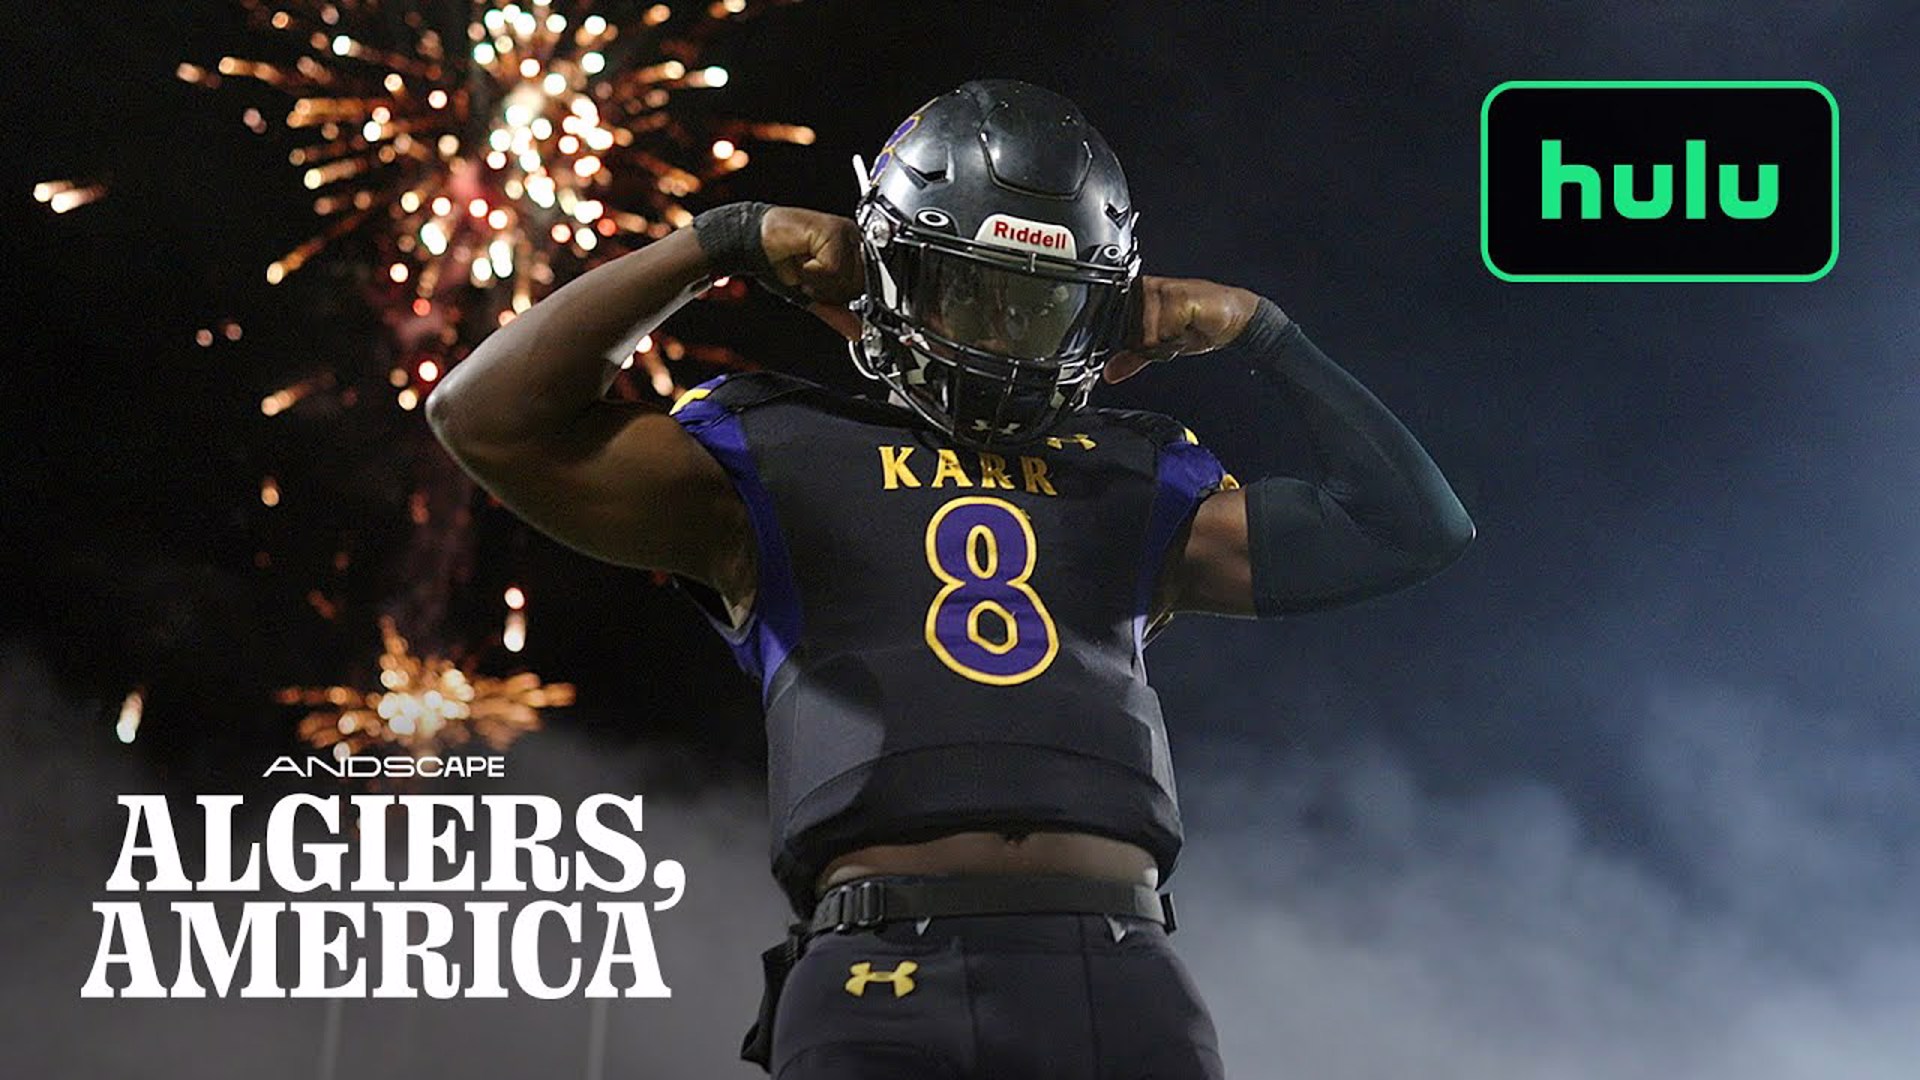 Algiers, America chronicles the journey of Coach Brice Brown and the Edna Karr Cougars a predominantly Black high school in Algiers, New Orleans.